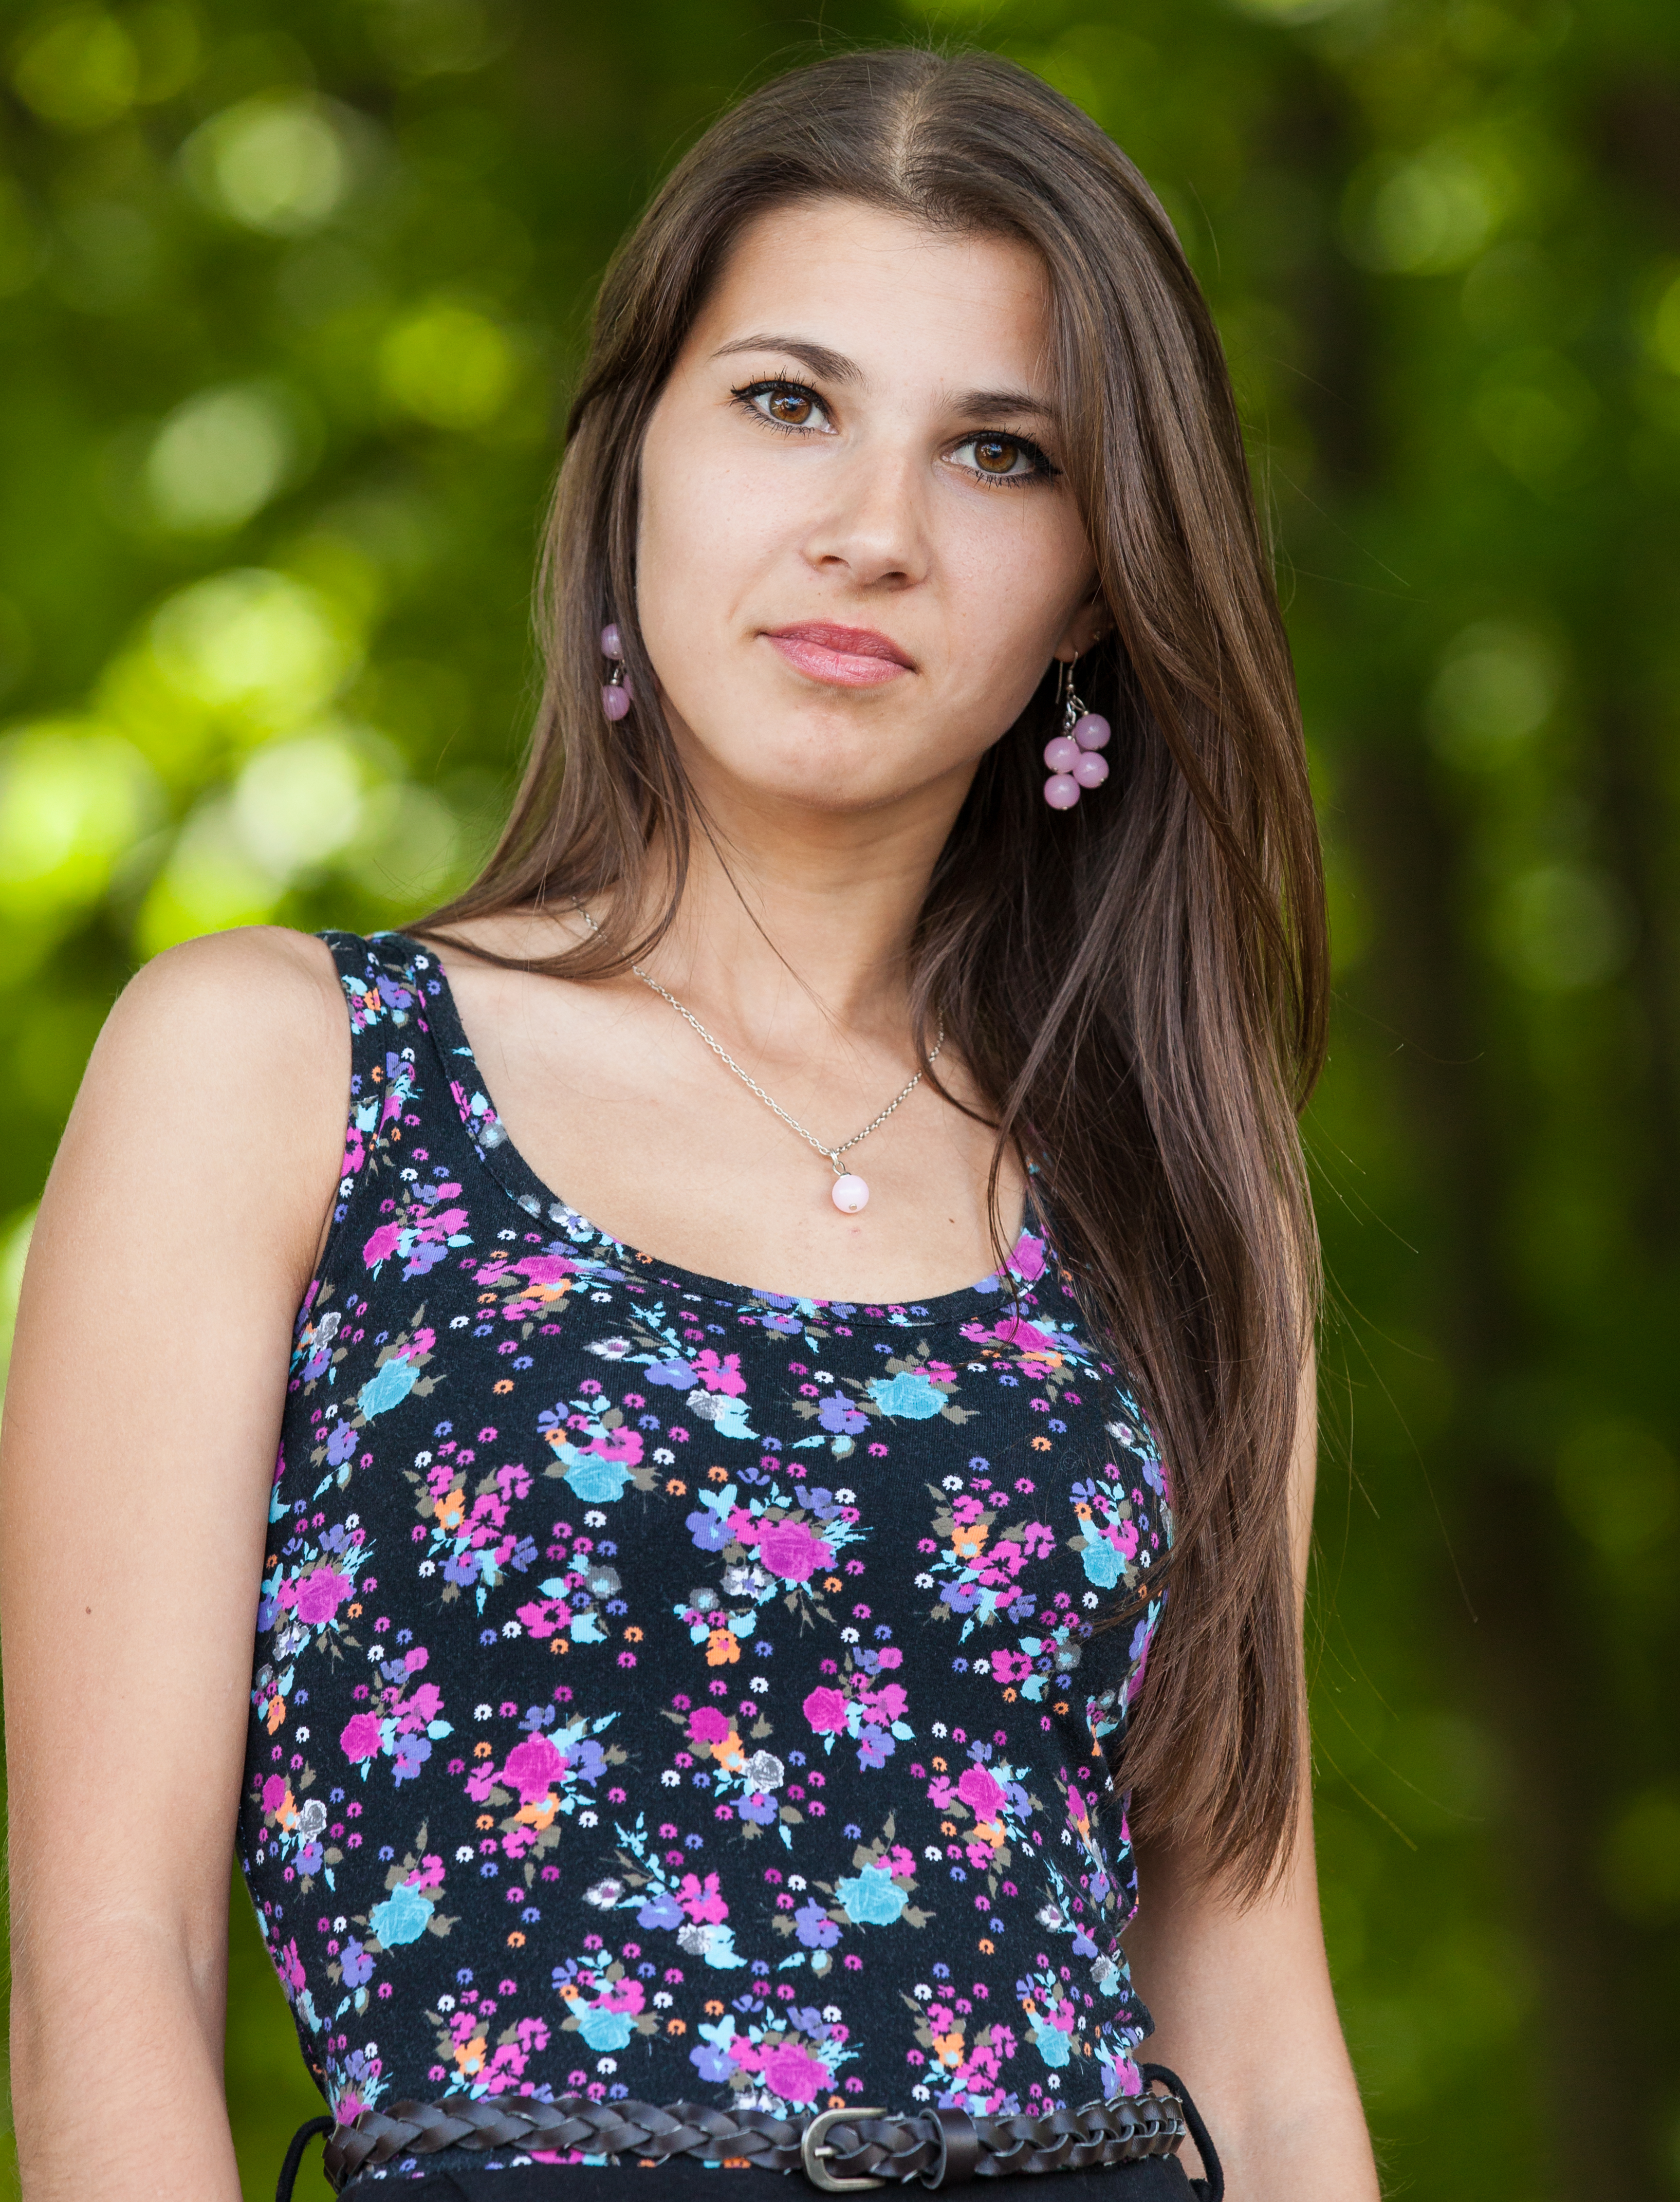 an amazingly beautiful Roman-Catholic girl photographed in May 2014, picture 4/25